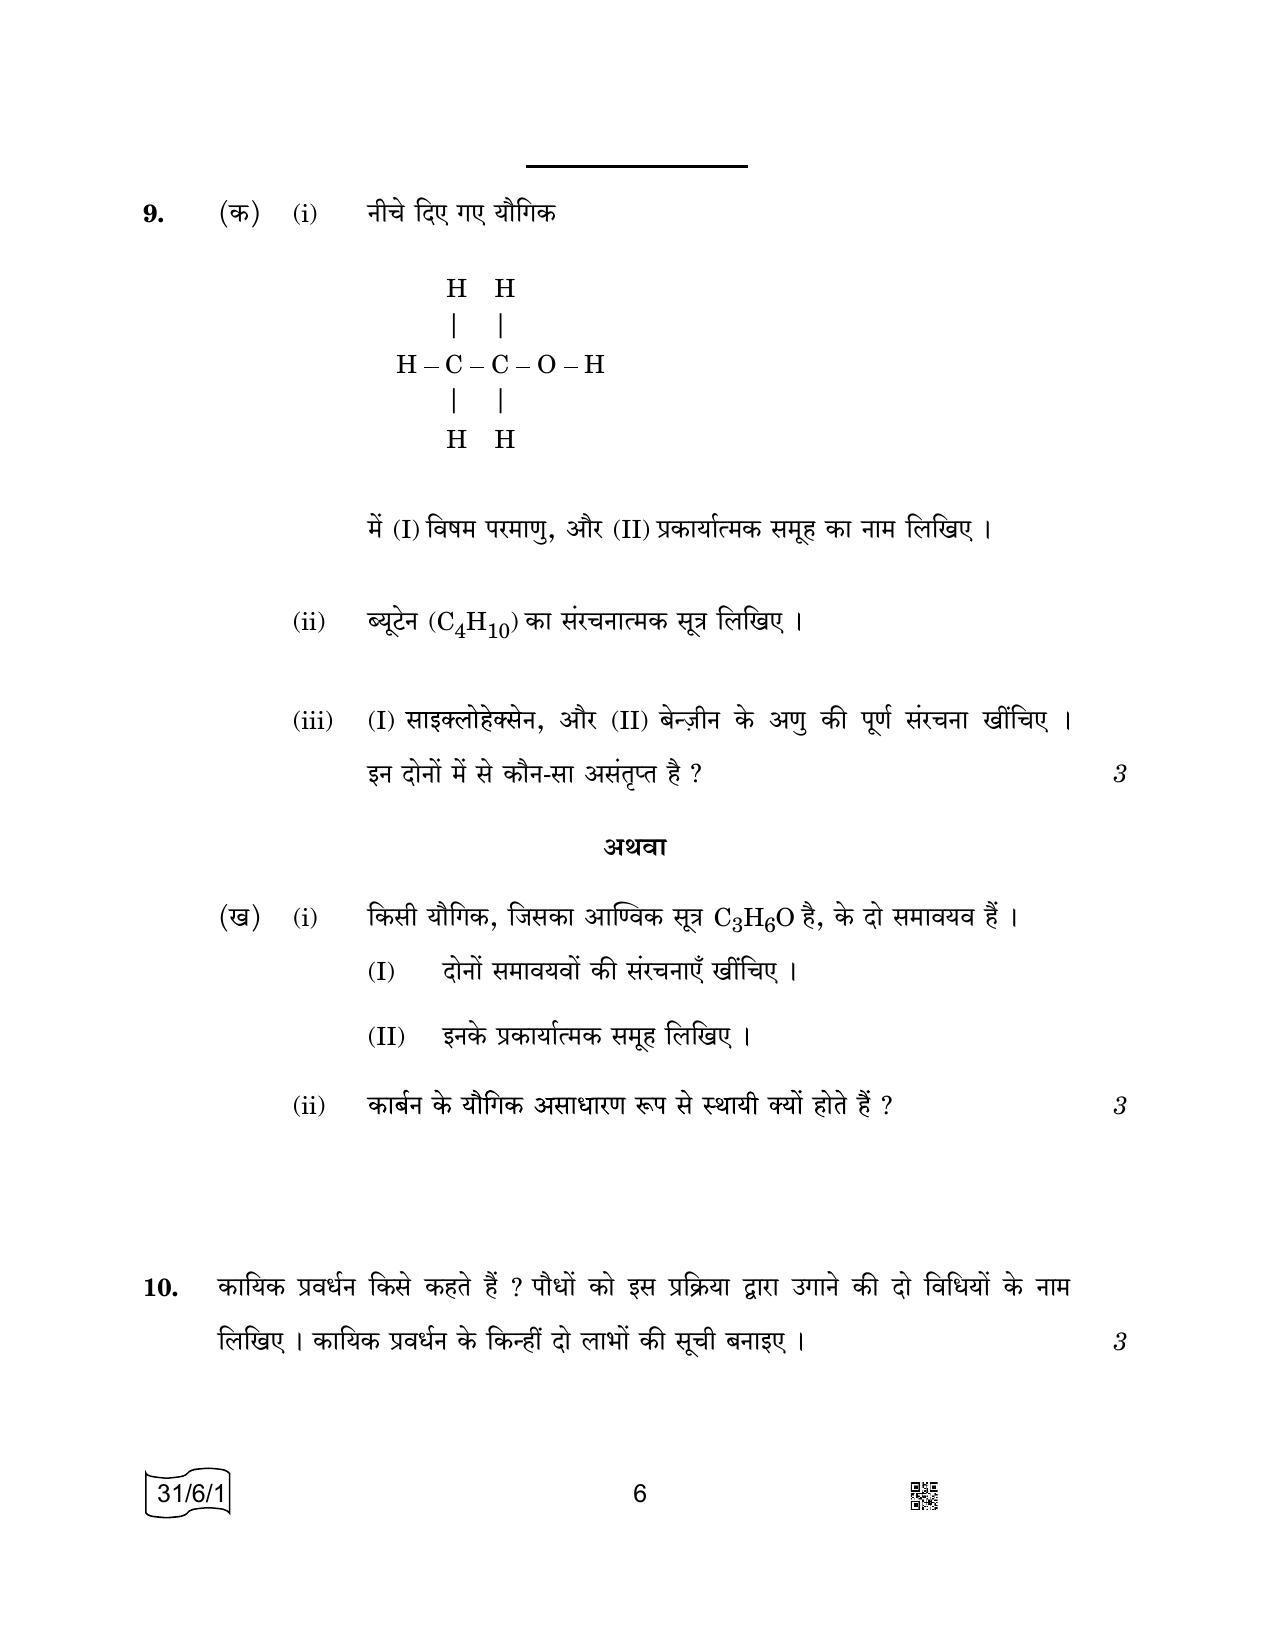 CBSE Class 10 31-6-1 SCIENCE 2022 Compartment Question Paper - Page 6